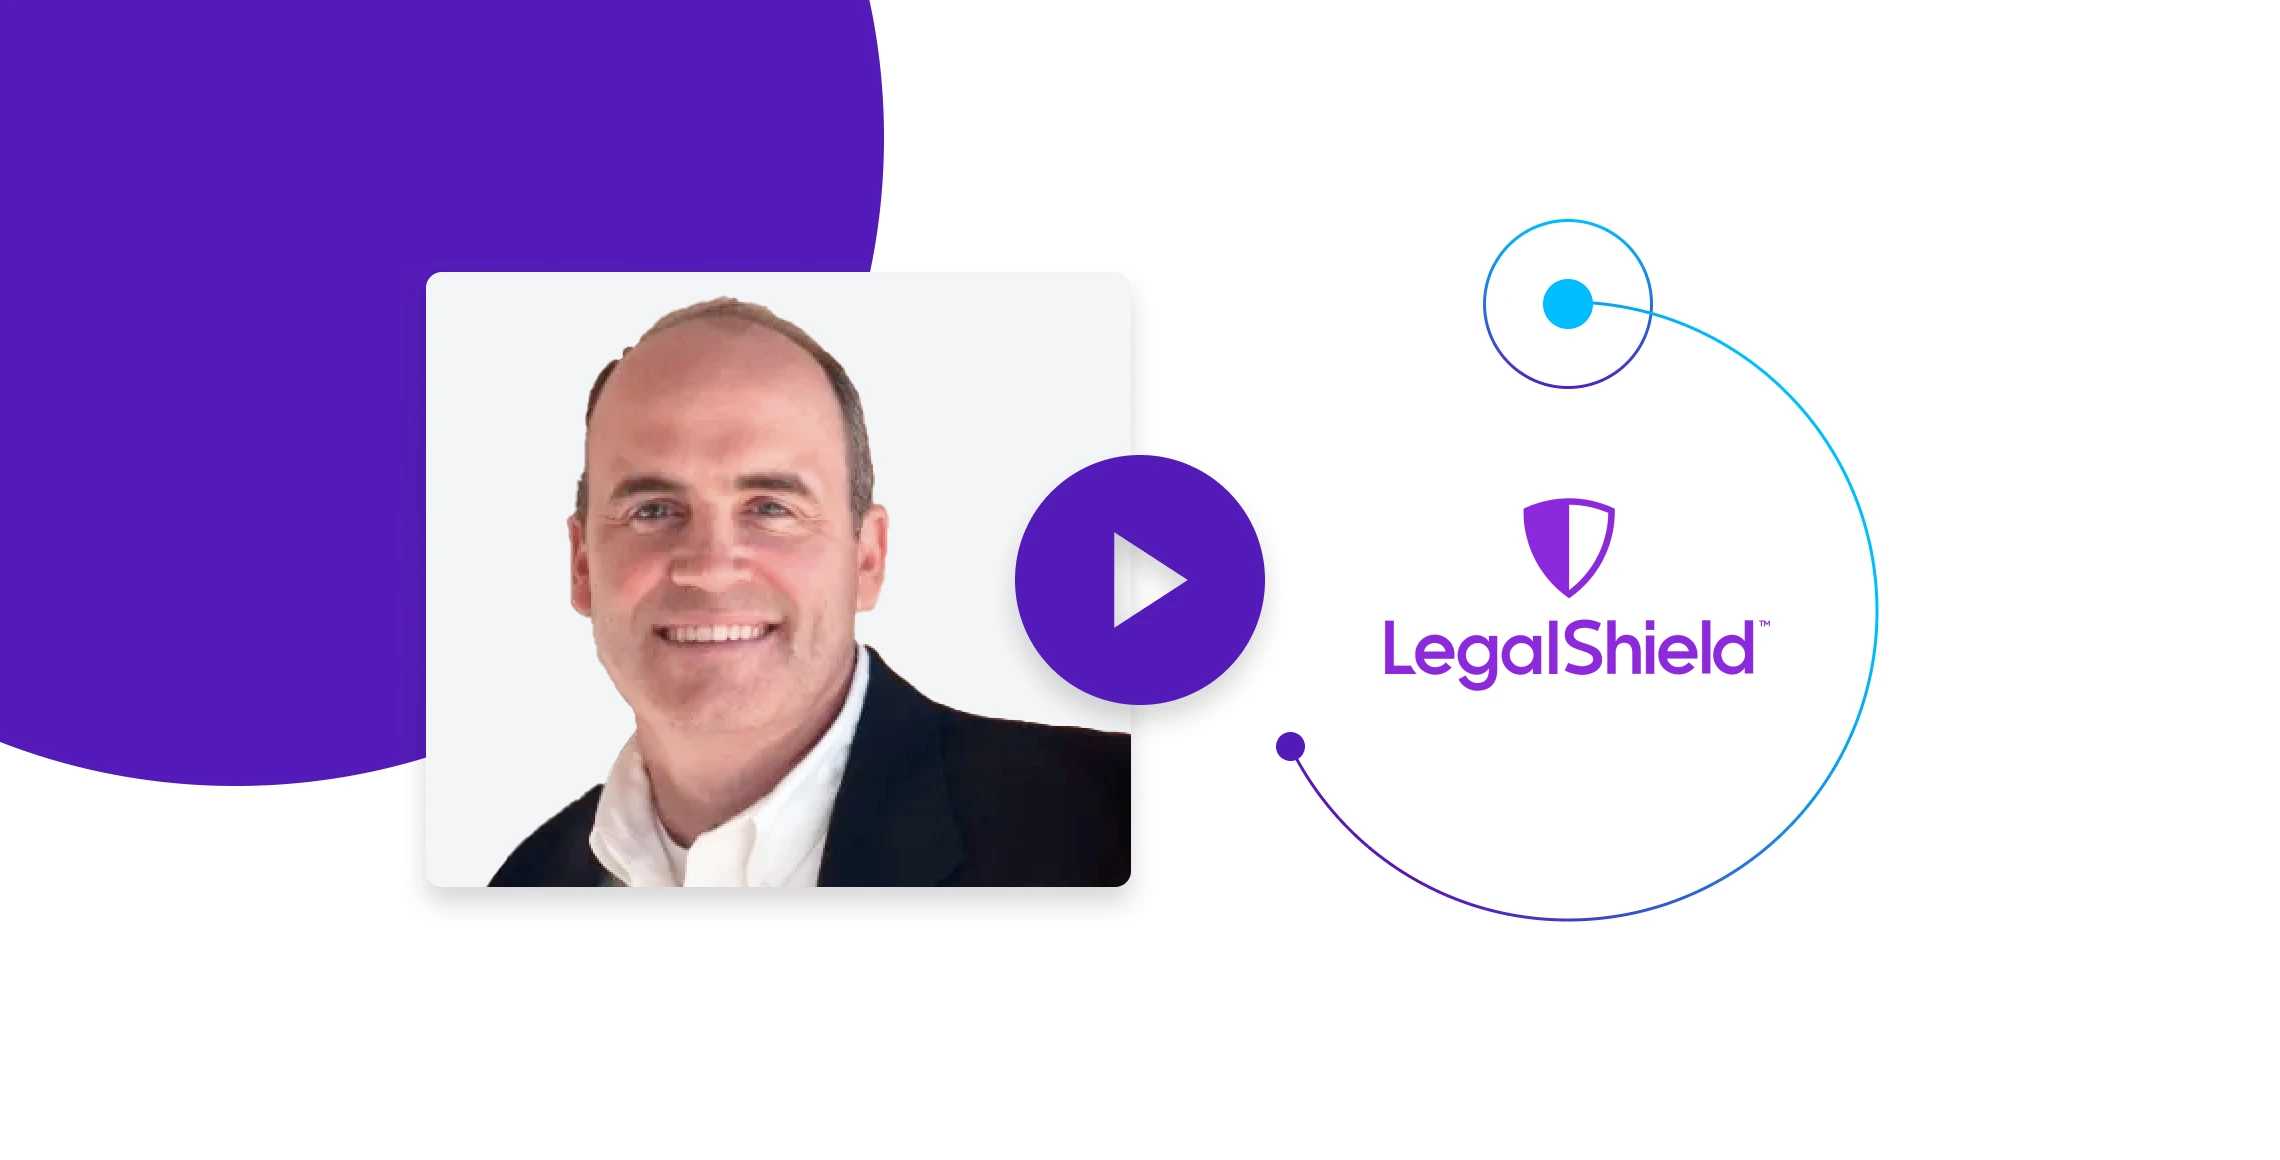 Legalshield Tell Us About Your Organization And Your Role